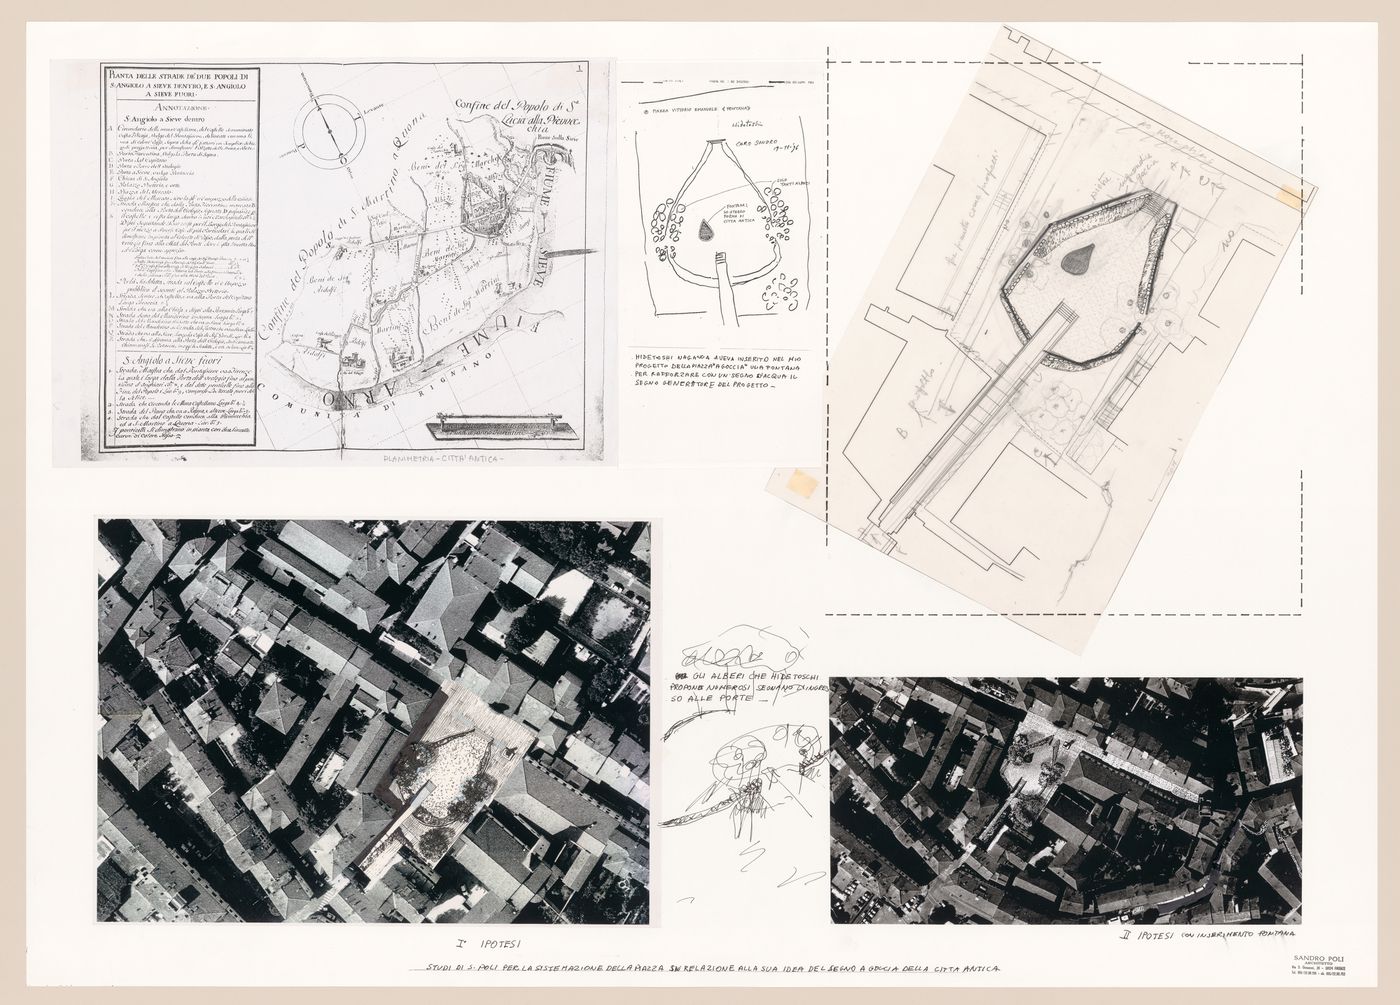 Sketches, drawings and photographs for Riqualificazione centro Storico di Pontassieve [Redevelopment of the historical center of Pontassieve], Florence, Italy